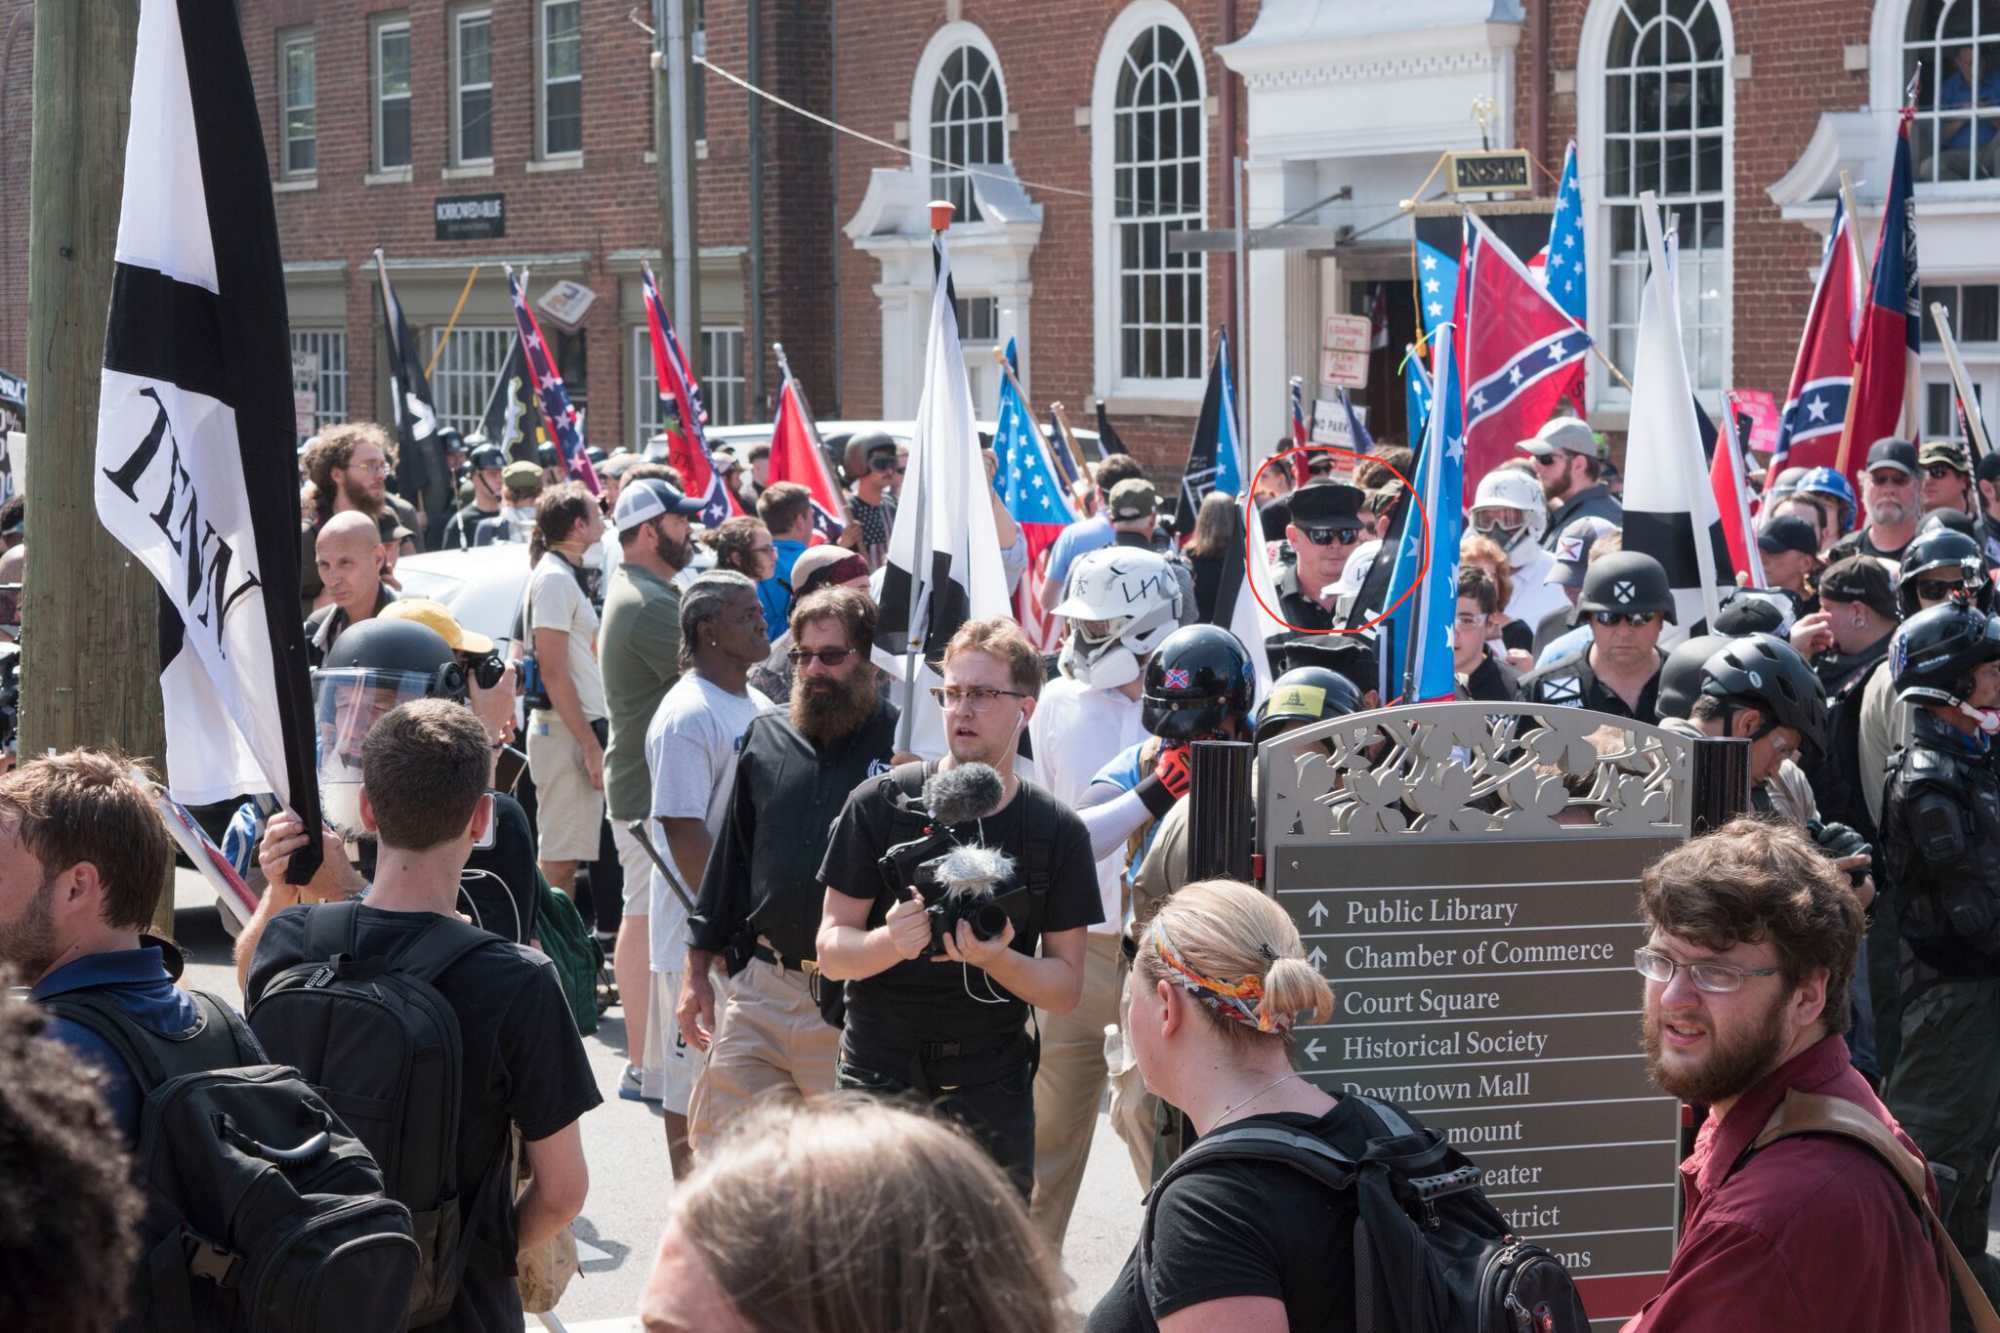 White supremacists march near the library in Charlottesville, Virginia. Photo courtesy of the Southern Poverty Law Center.